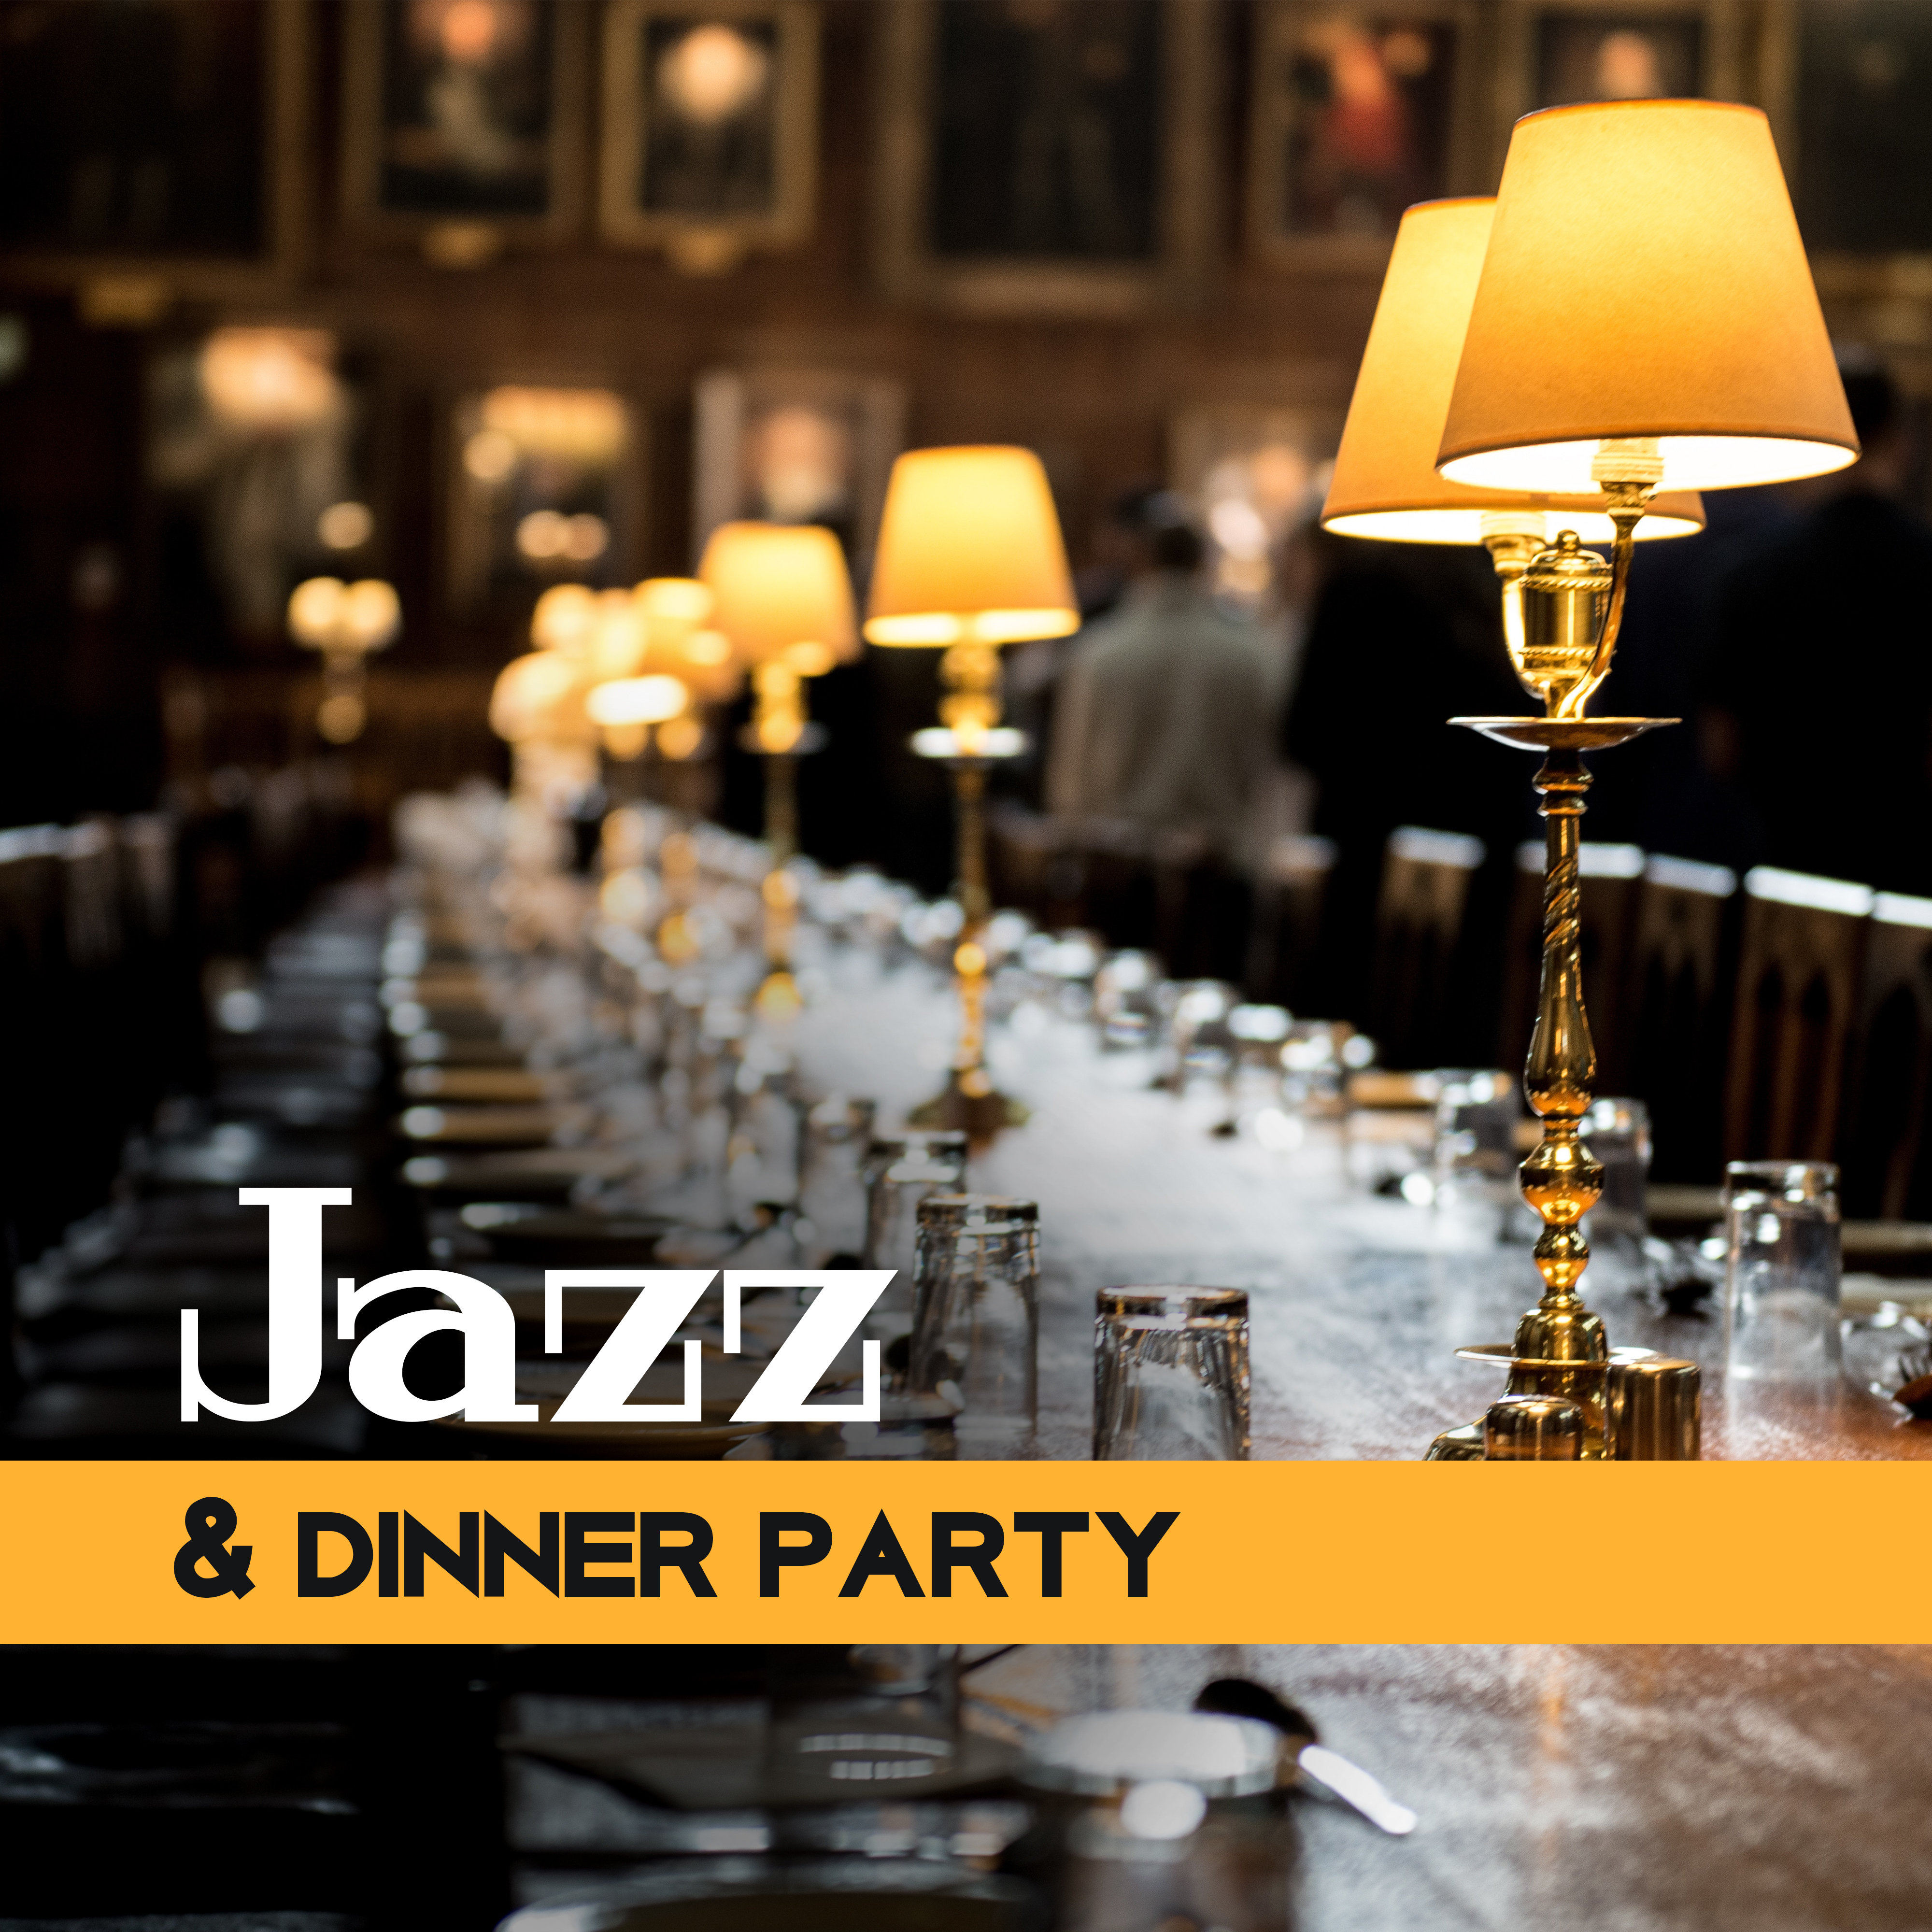 Jazz & Dinner Party -  Soothing Jazz Compilation, Cocktail Mix 2017, Romantic Music for Dinner